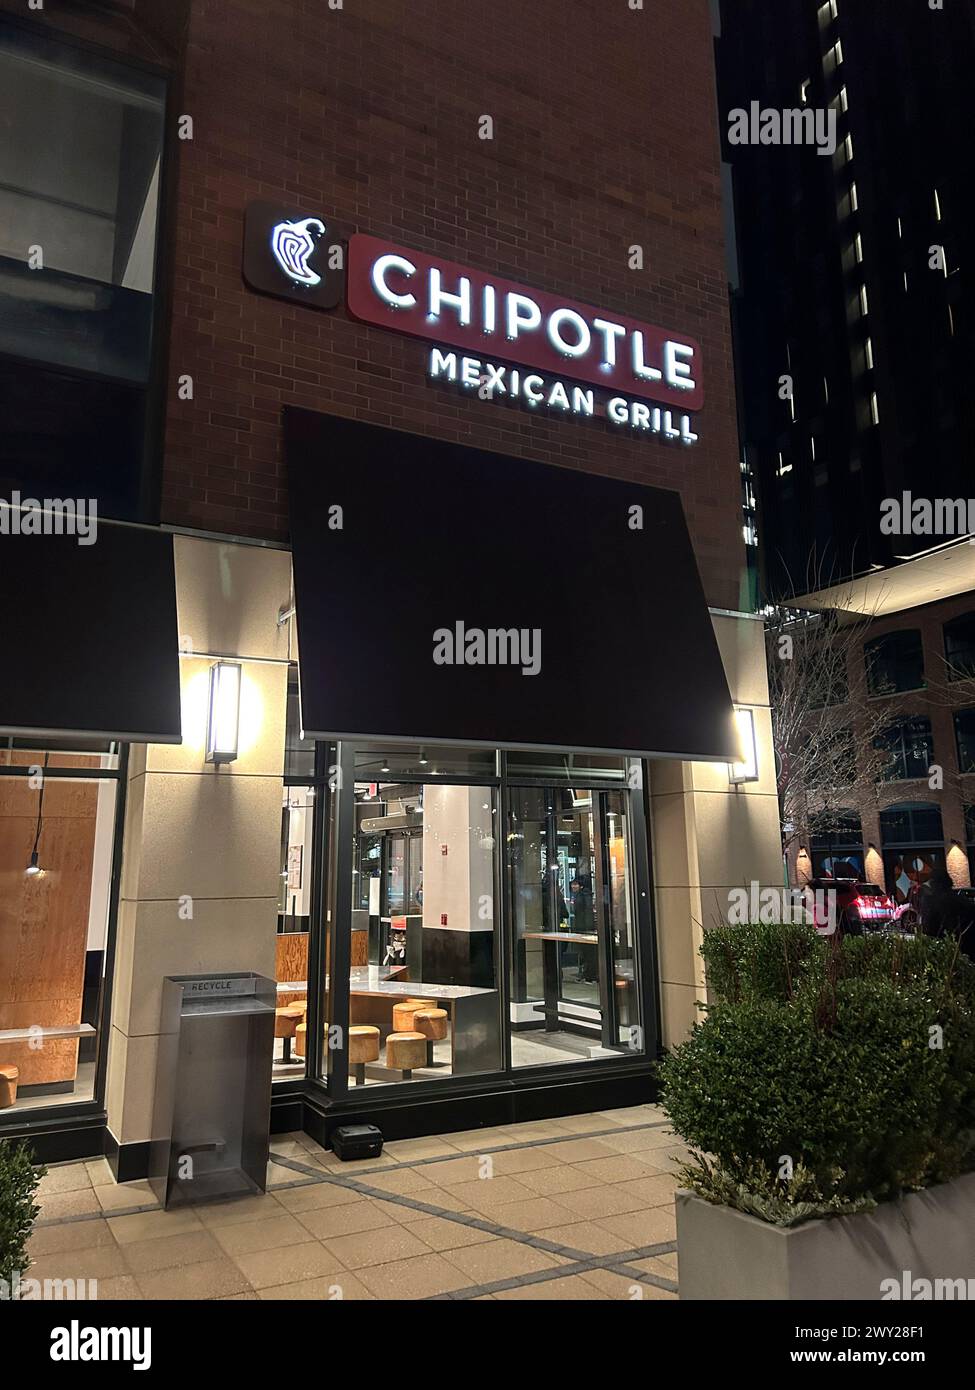 Chipotle Mexican Grill, exterior view at night, Cambridge, Massachusetts, USA Stock Photo